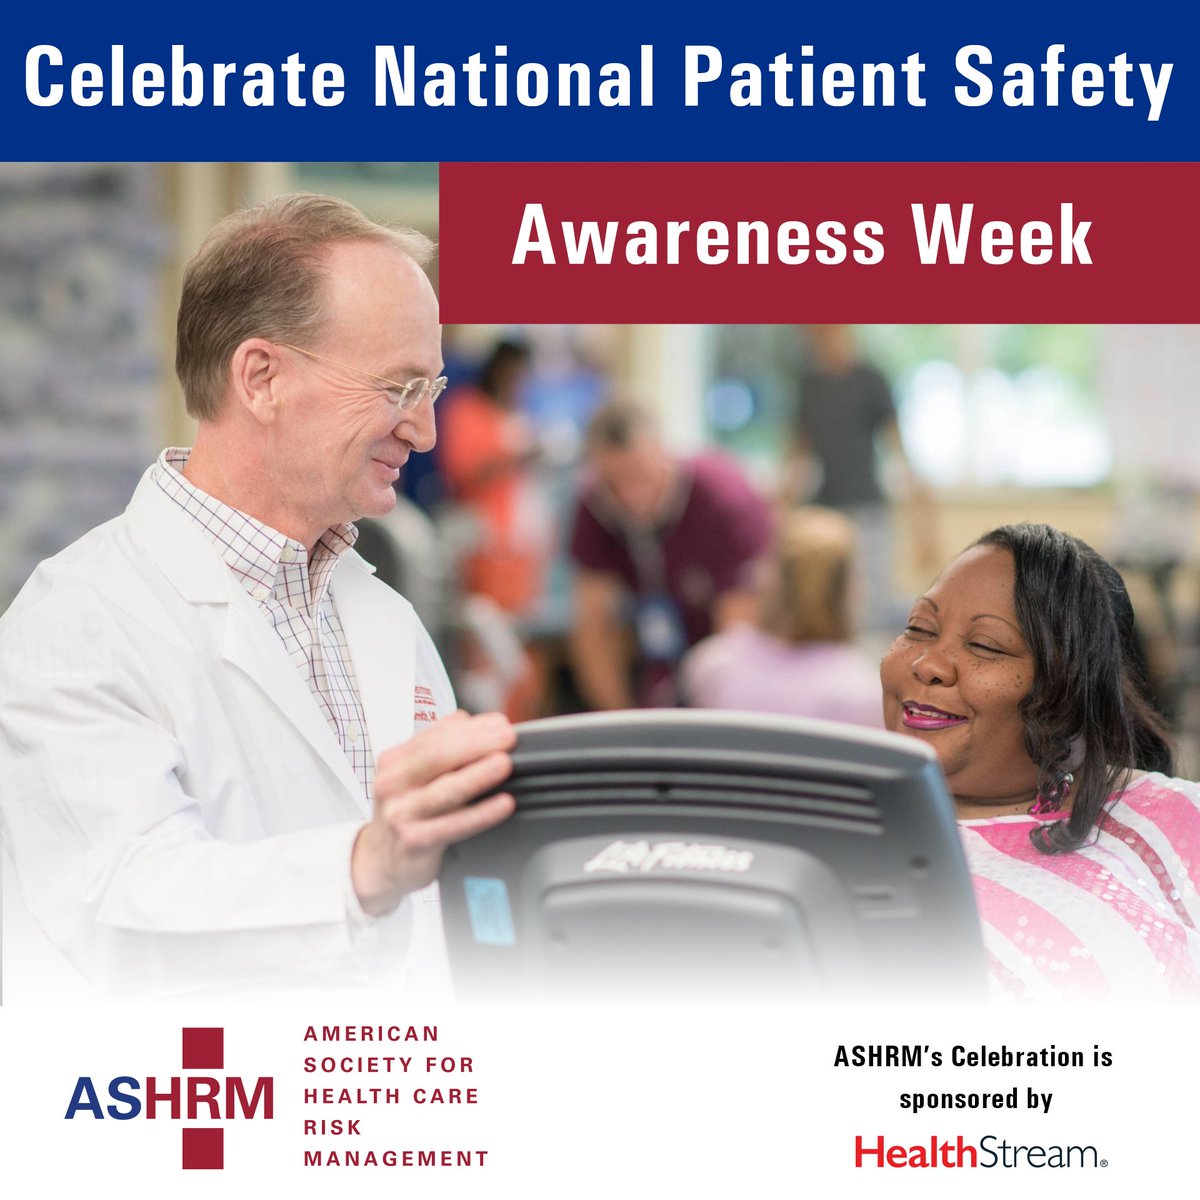 Celebrate National Patient Safety Awareness Week with ASHRM! 🎉 Participate in educational events, enjoy themed gifts, and access valuable tools. Let’s create a culture of safety together! #PSAW24 ow.ly/s69j50QQEZM